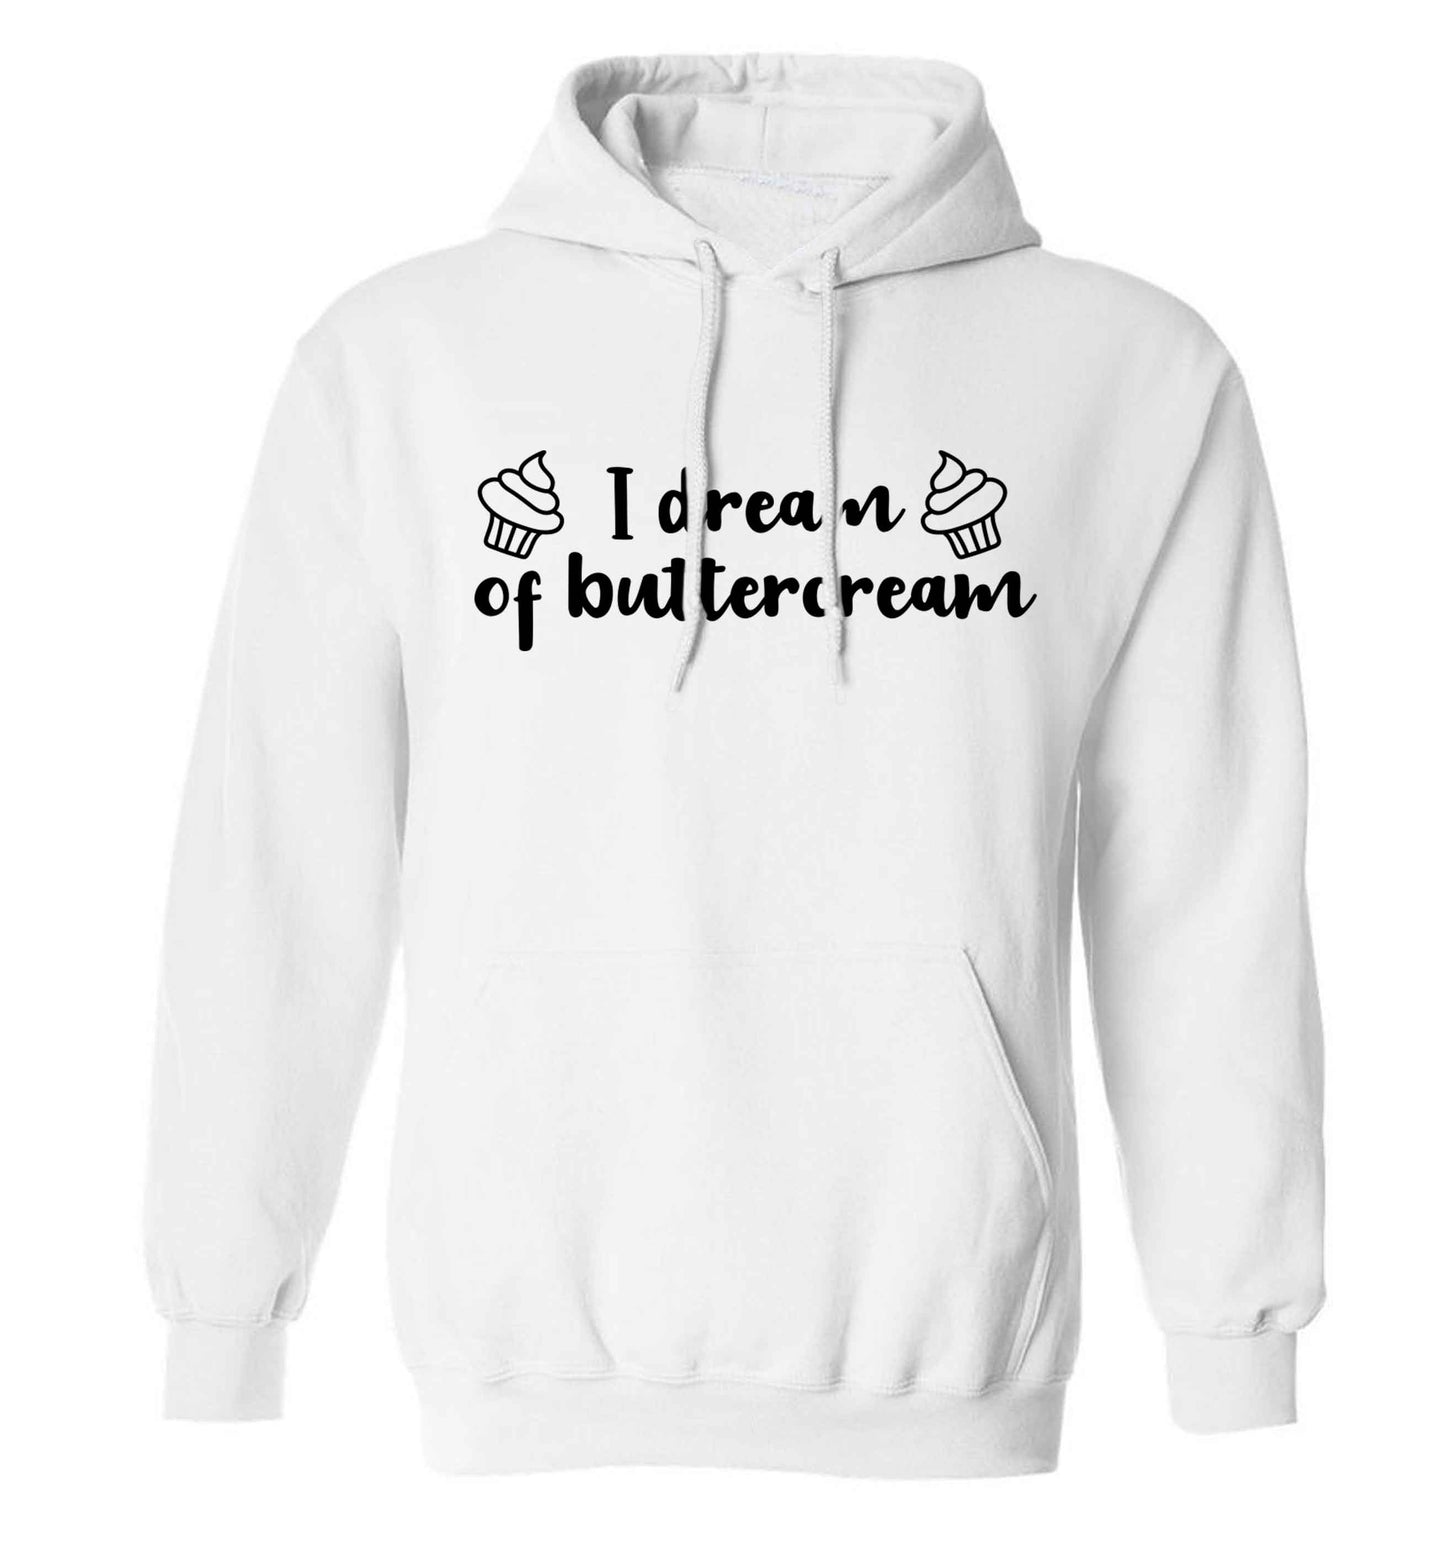 I dream of buttercream adults unisex white hoodie 2XL